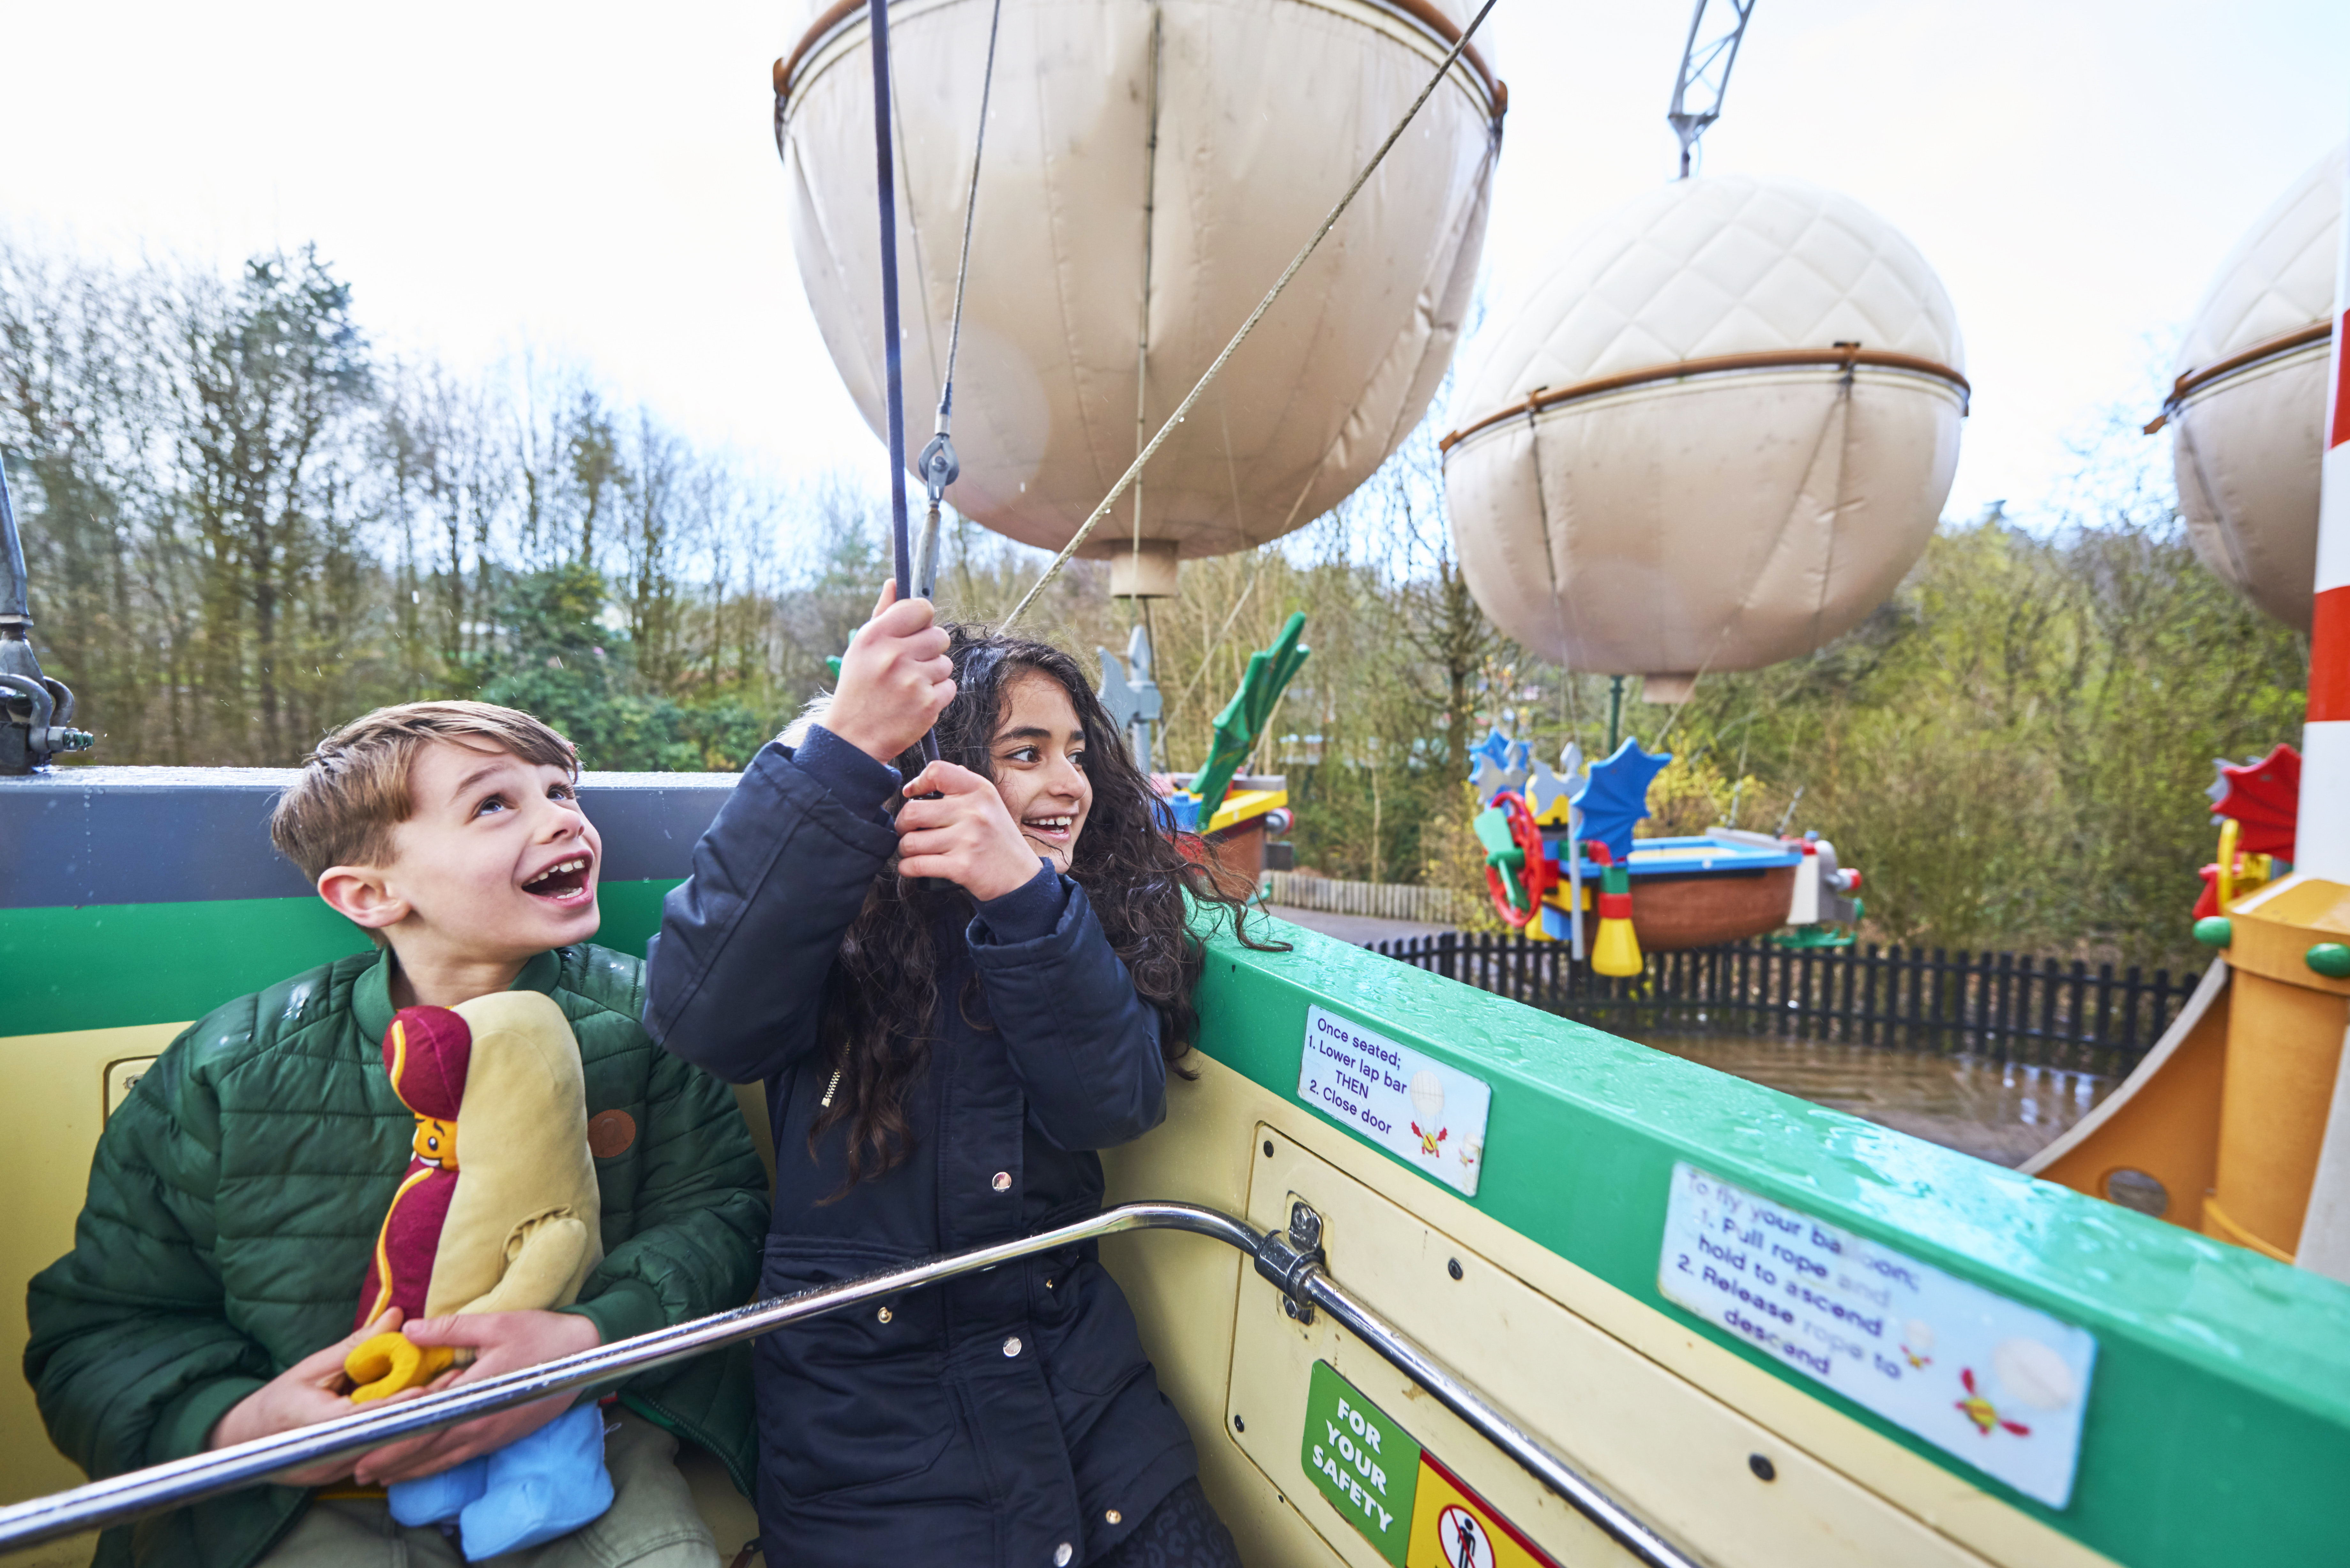 Girl and boy looking up and smiling on Balloon School at the LEGOLAND Windsor Resort